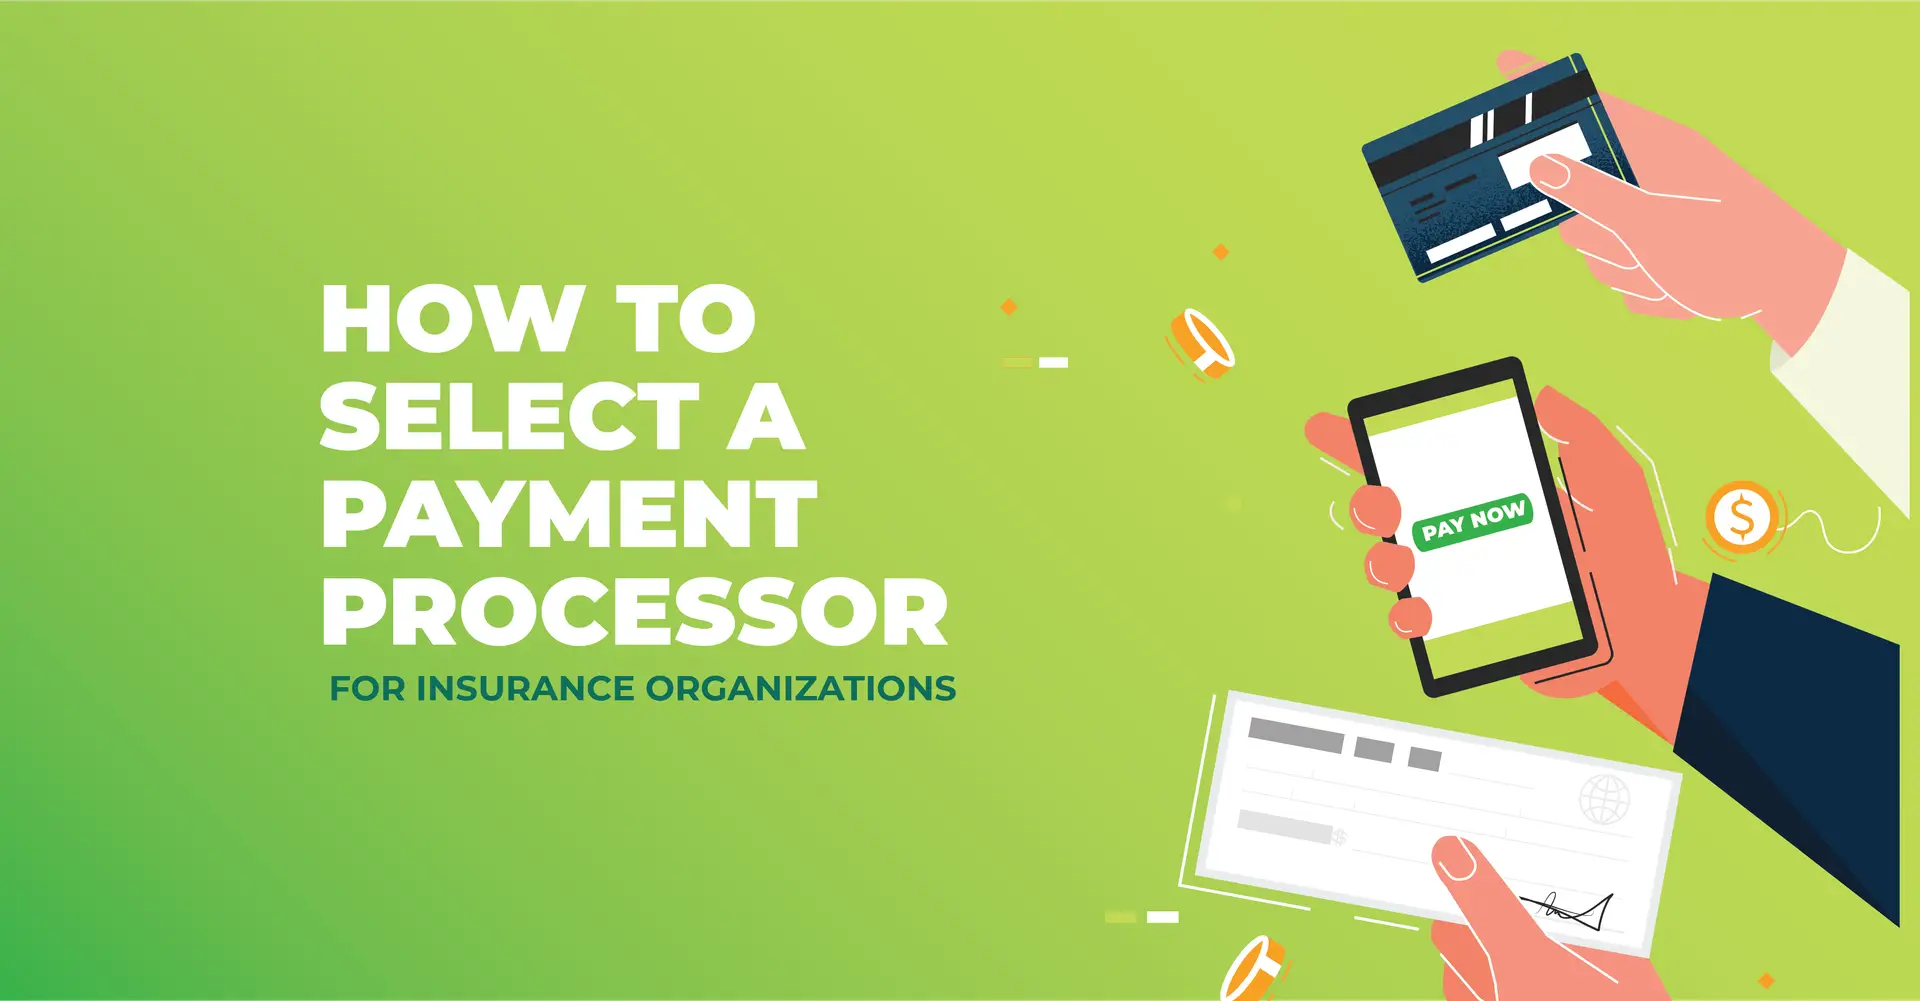 How to Choose a Payment Processor for Your Insurance Organization